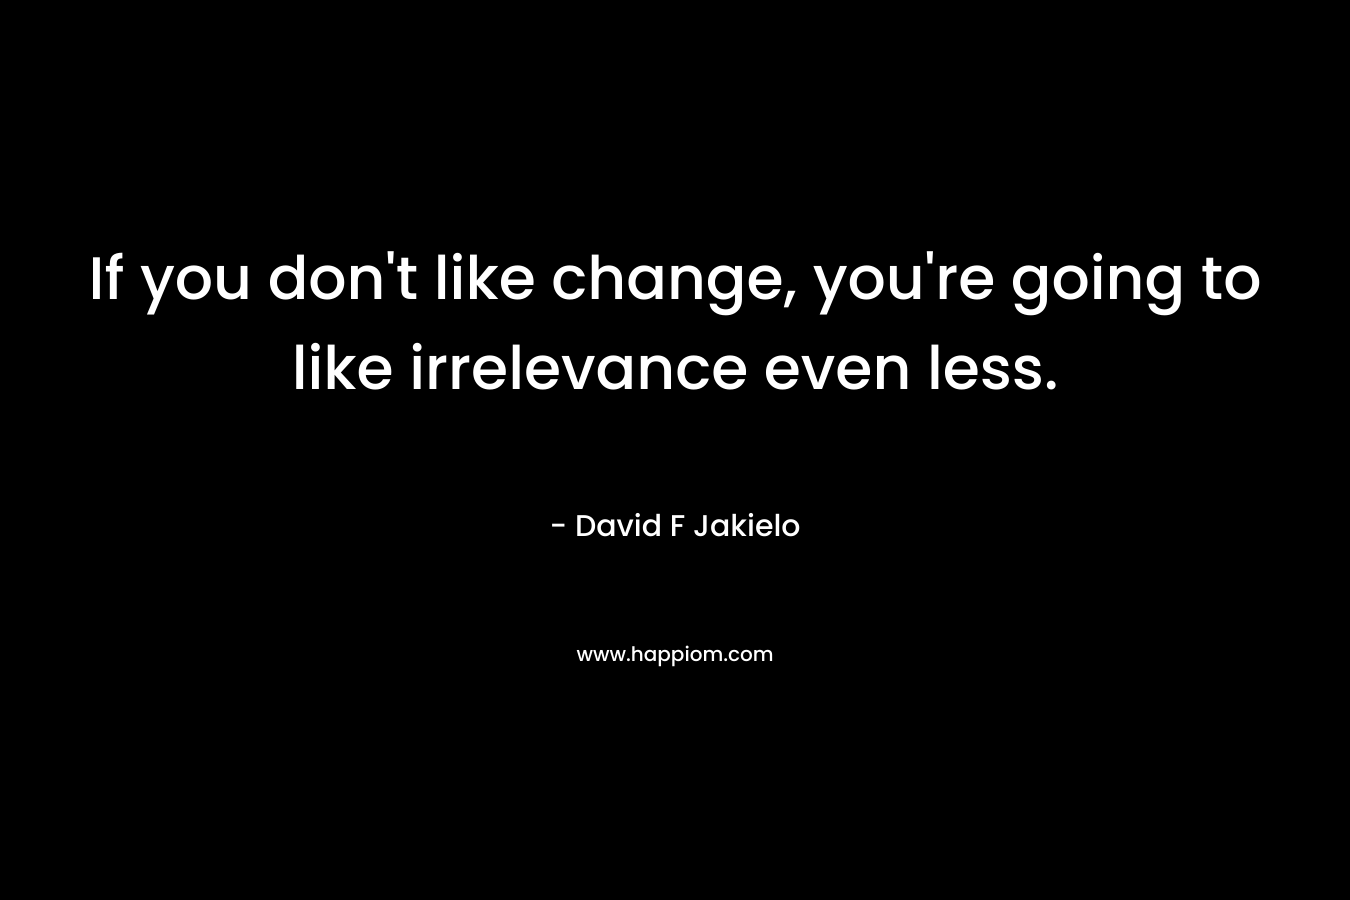 If you don’t like change, you’re going to like irrelevance even less. – David F Jakielo